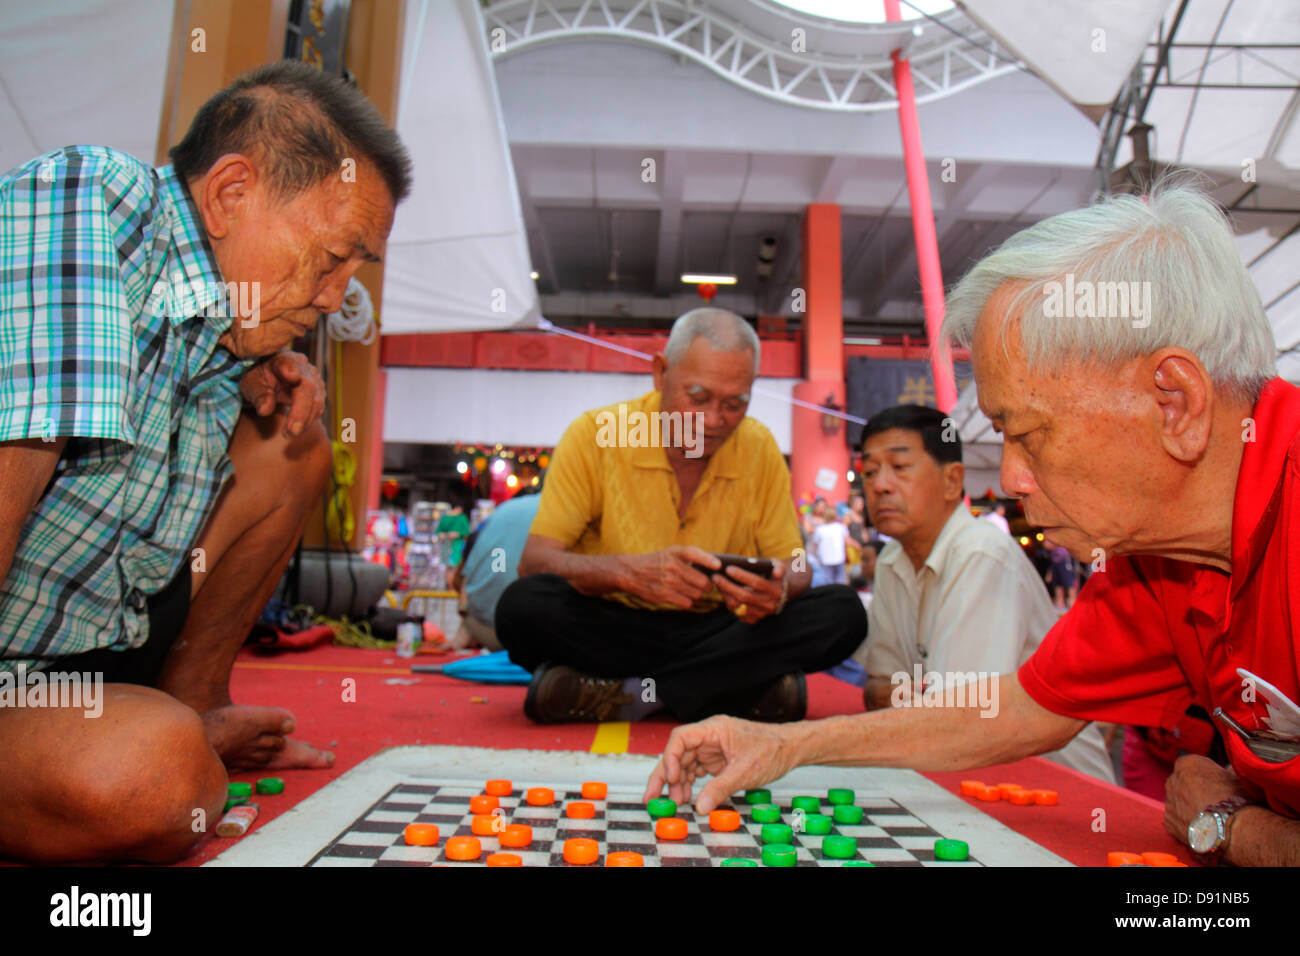 Singapore Chinatown,Asian man men male,playing,checkers,draughts,board game,hanzi characters,checking,smart phone,phones,checking looking reading text Stock Photo